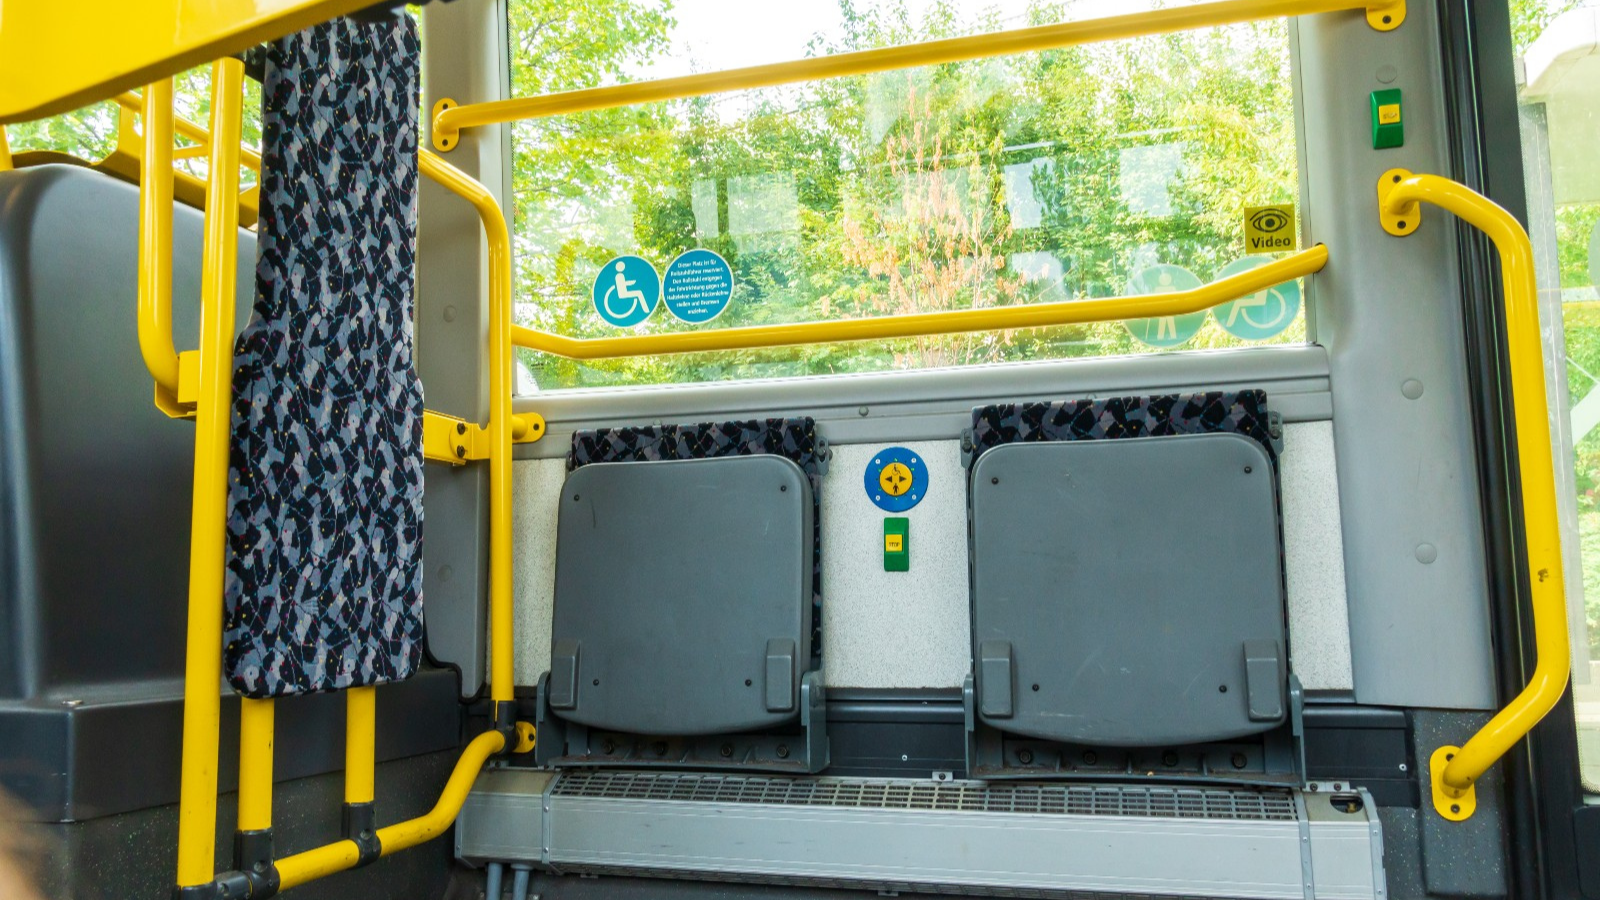 Priority seating on public bus